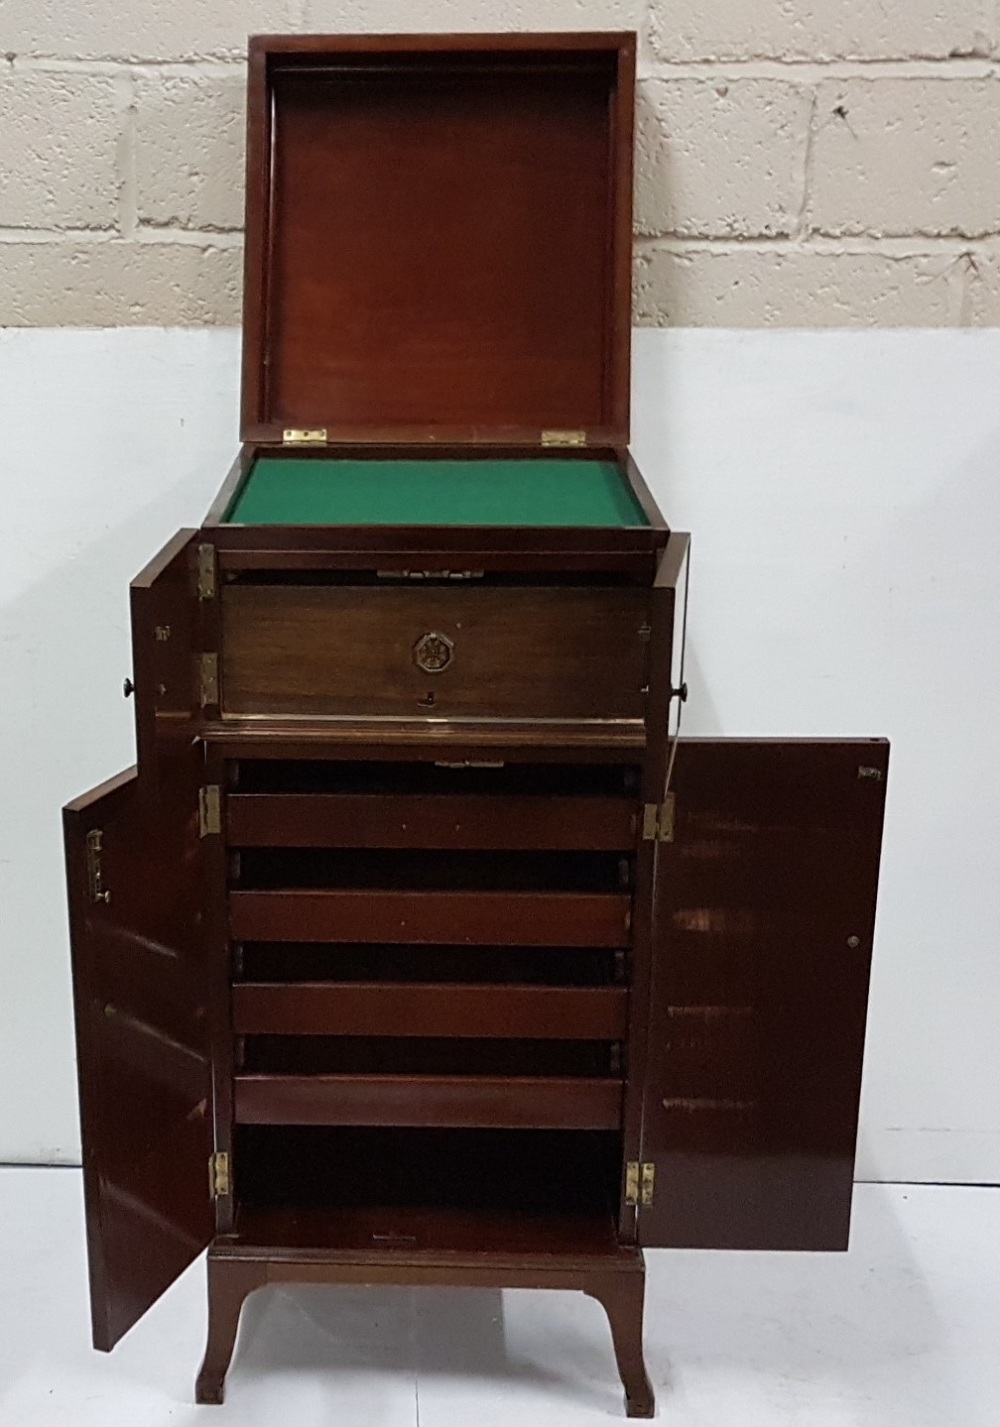 Early 20th C mahogany Music Cabinet with a hinged lid and drawer above a cabinet with 4 sliding - Image 2 of 2